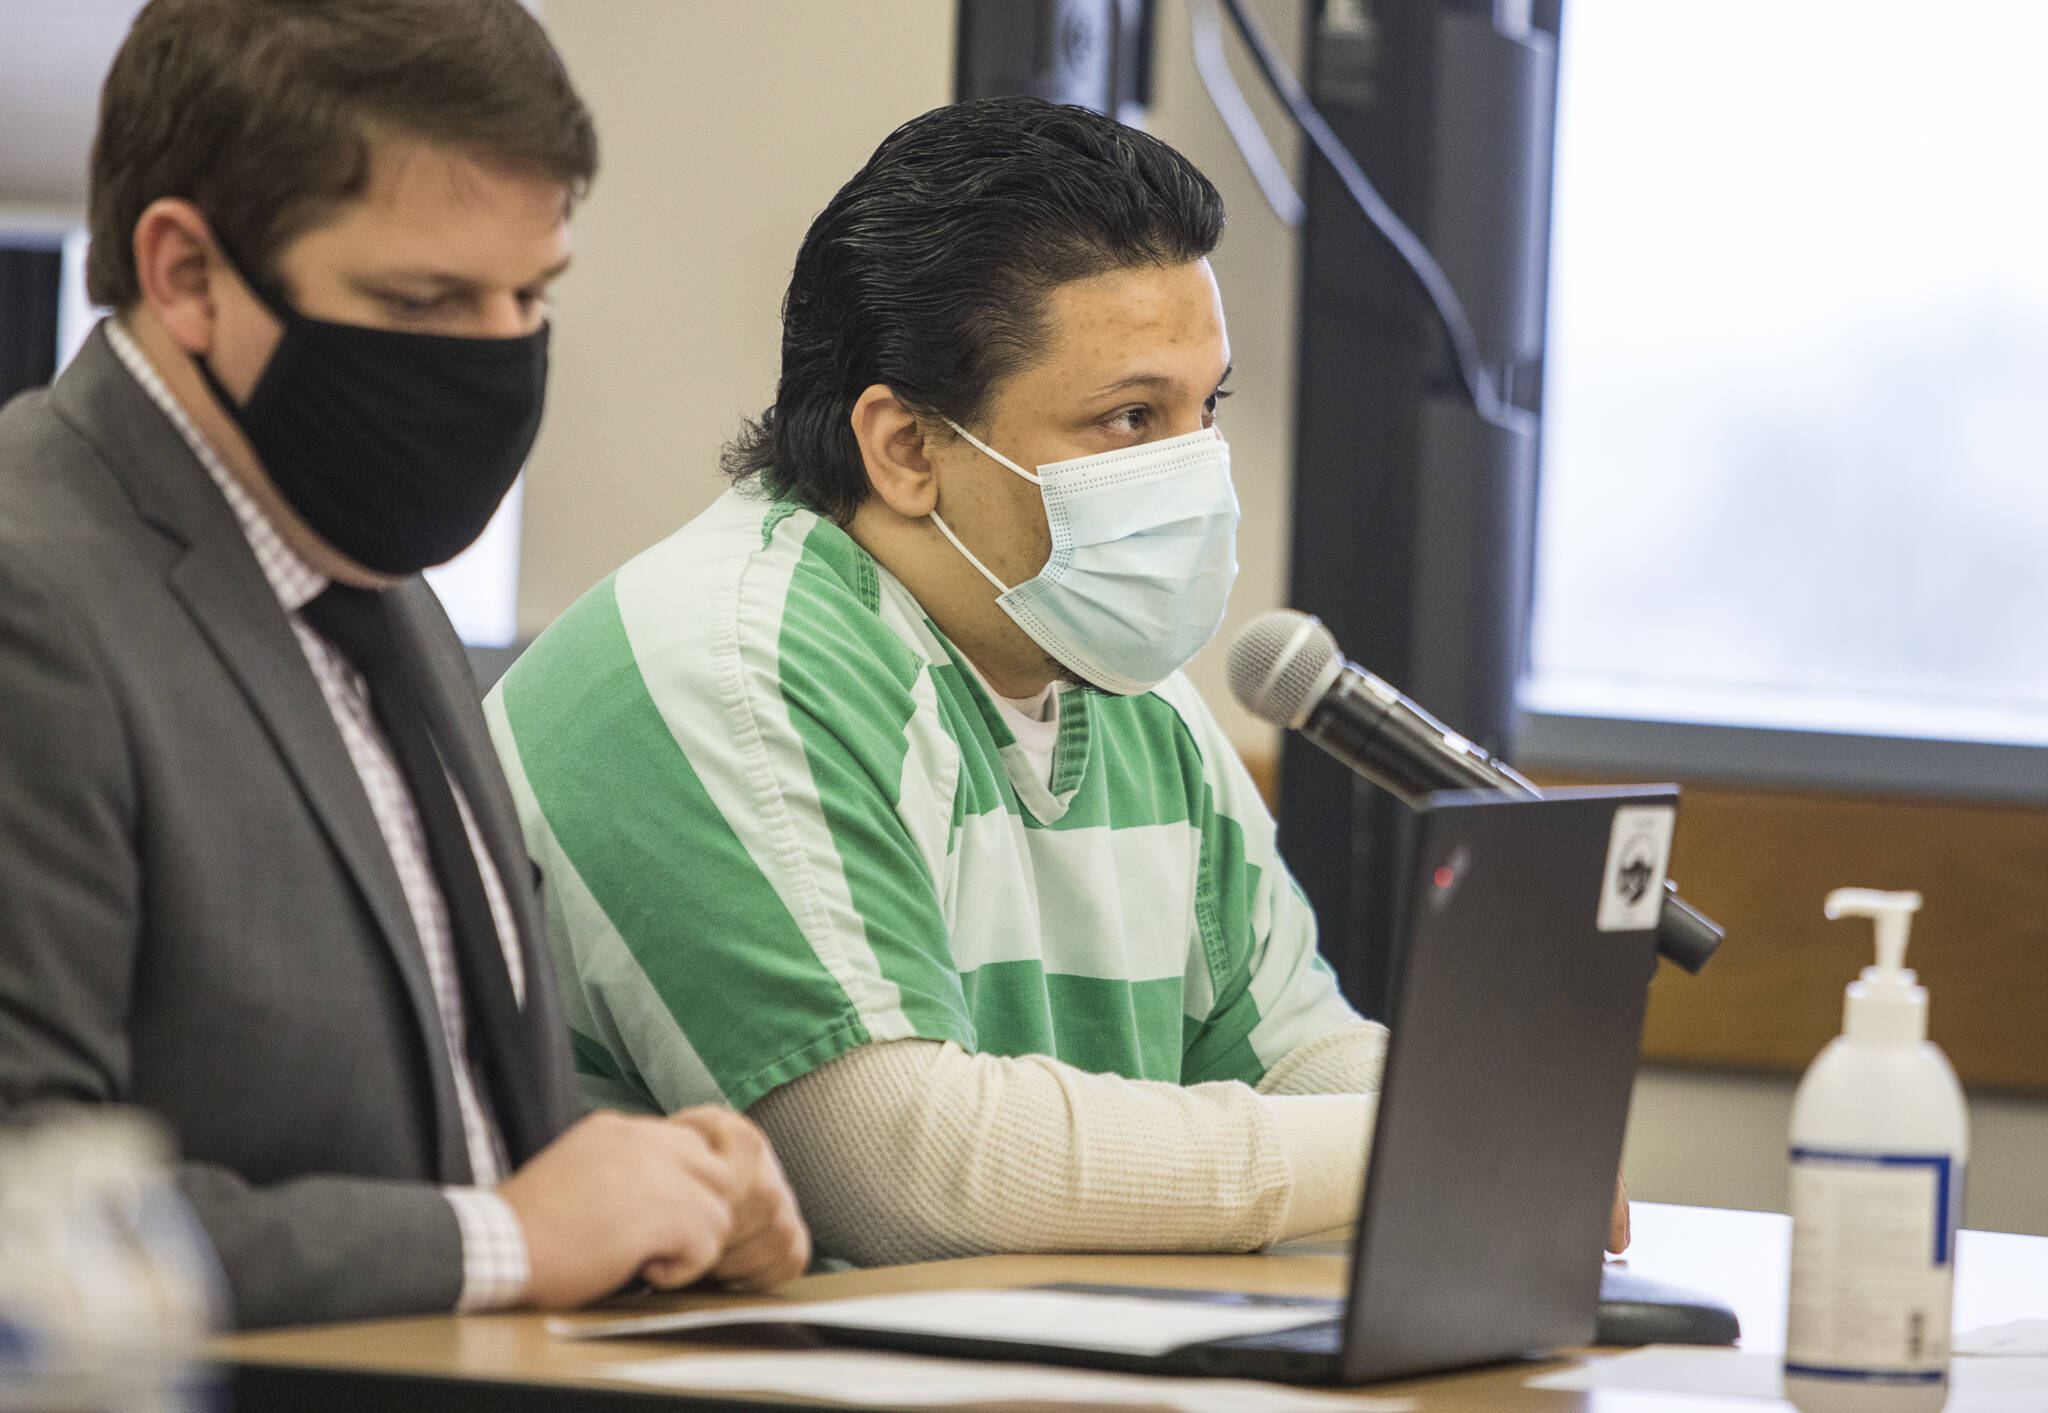 Jason Dominguez at his sentencing at the Snohomish County Courthouse on Thursday in Everett. (Olivia Vanni / The Herald)